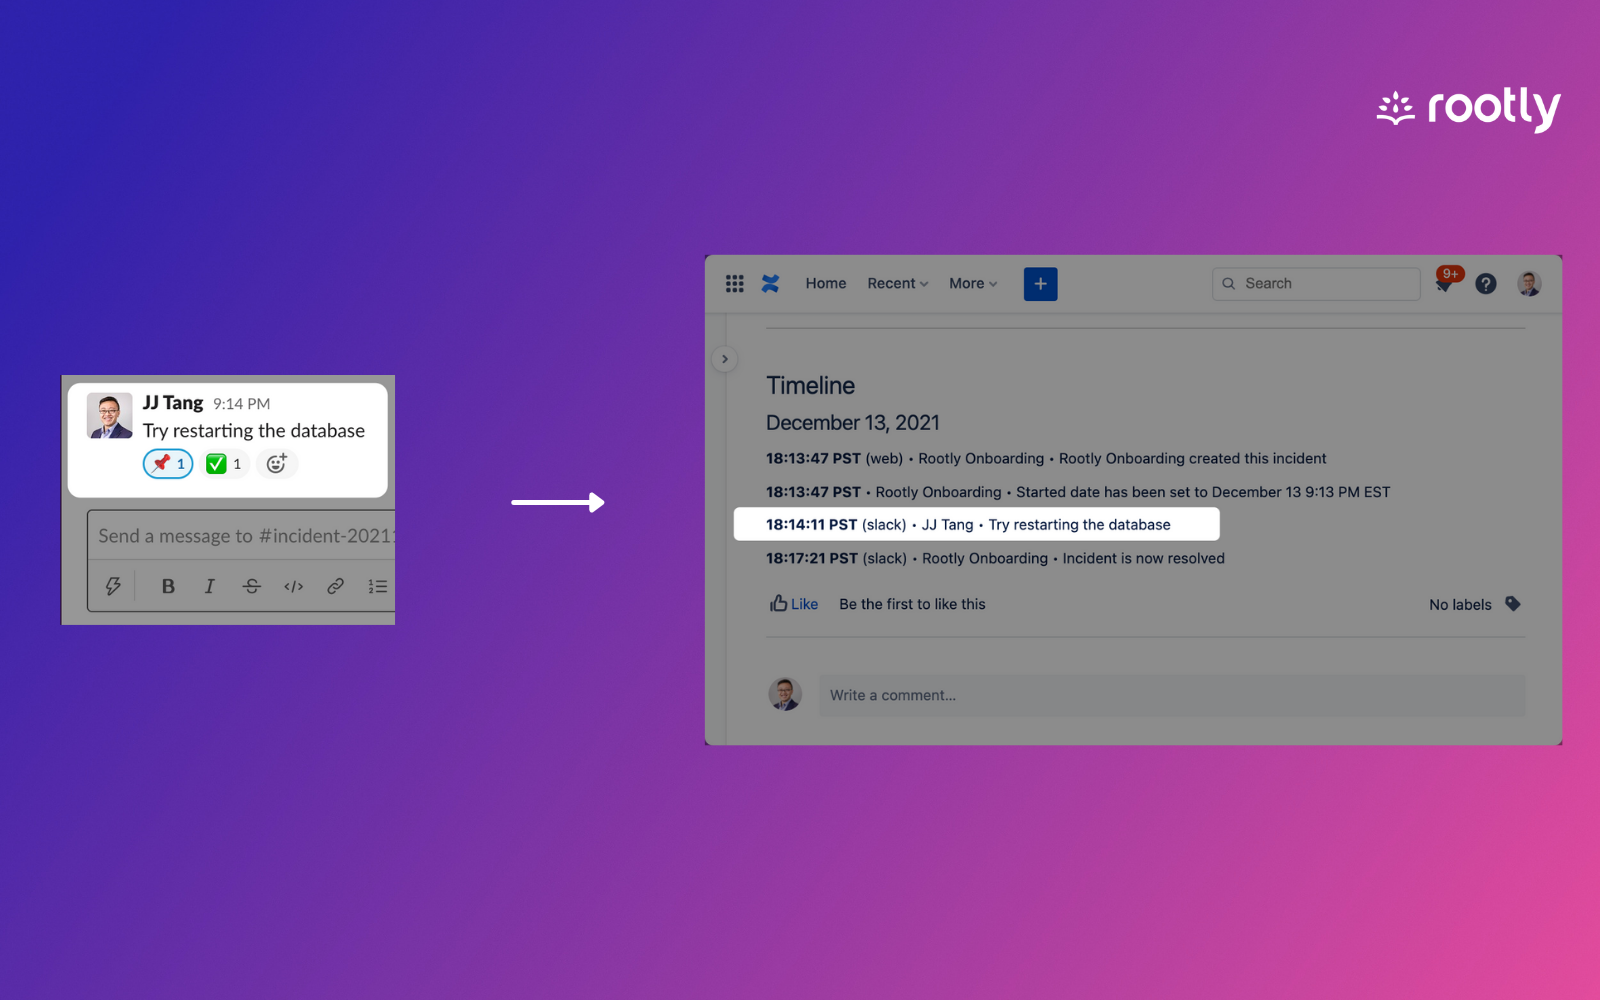 Automatically build postmortem timelines by pinning items in Slack. Supports Confluence, Google Docs, Notion, and others.